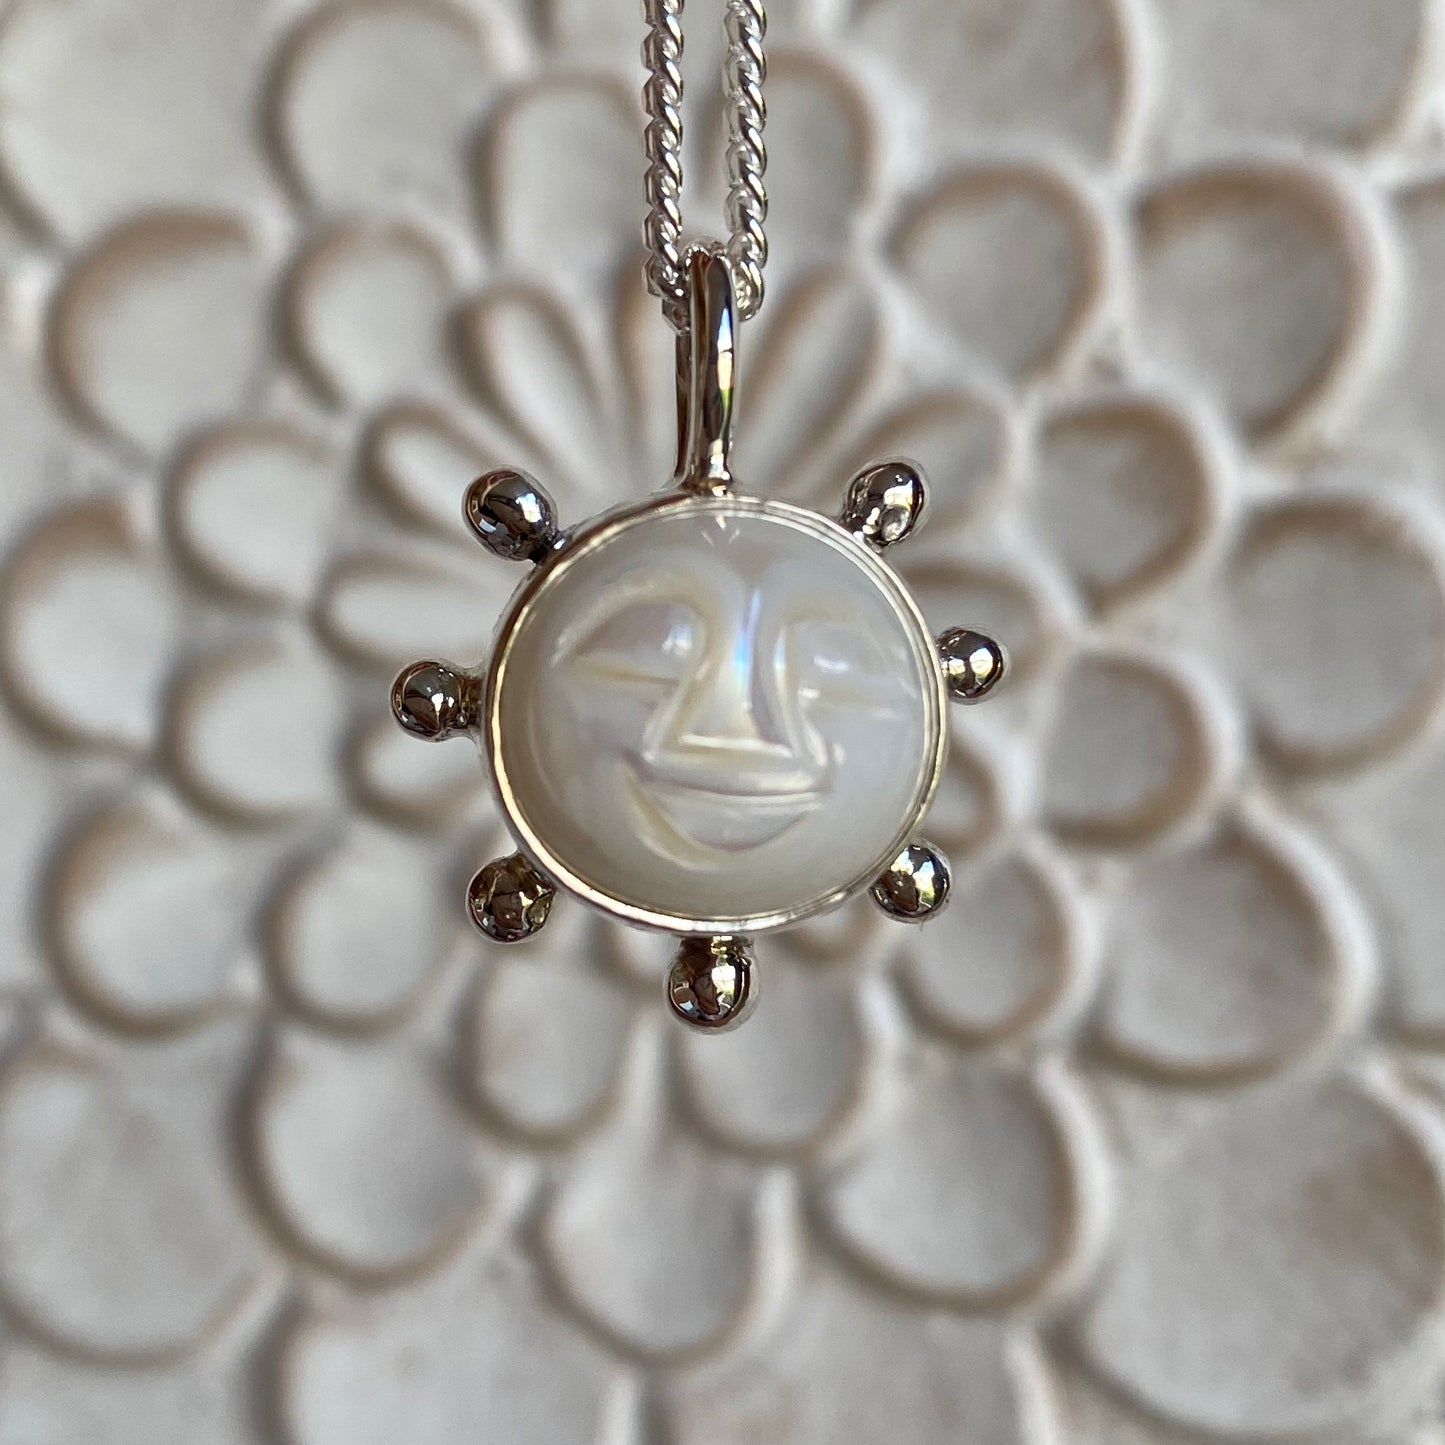 Pearly Sun Necklace